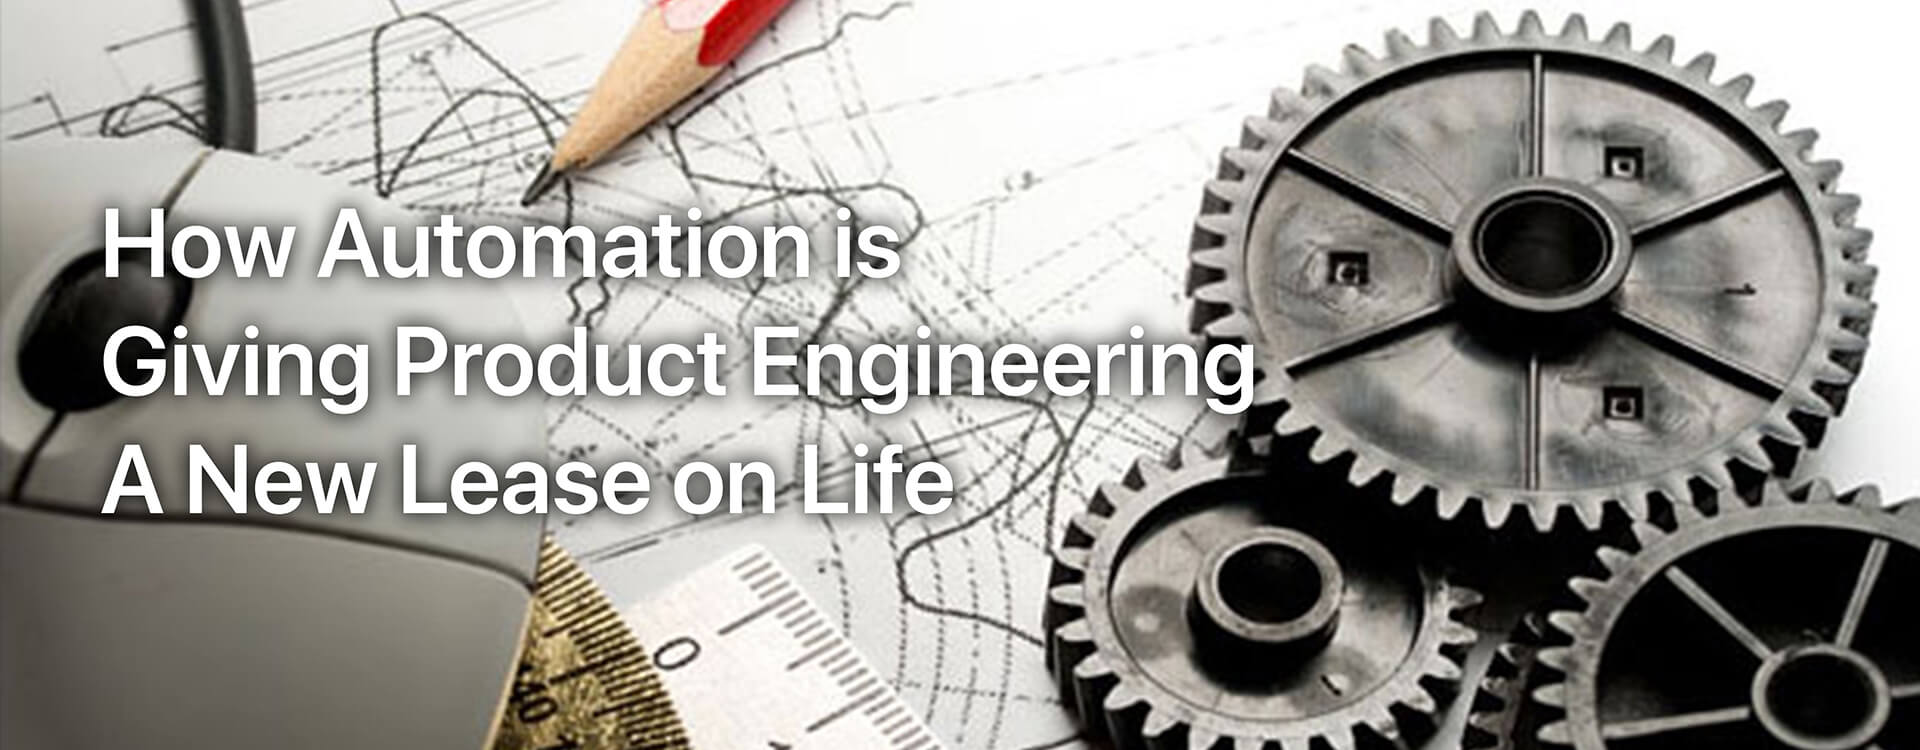 product engineering automation